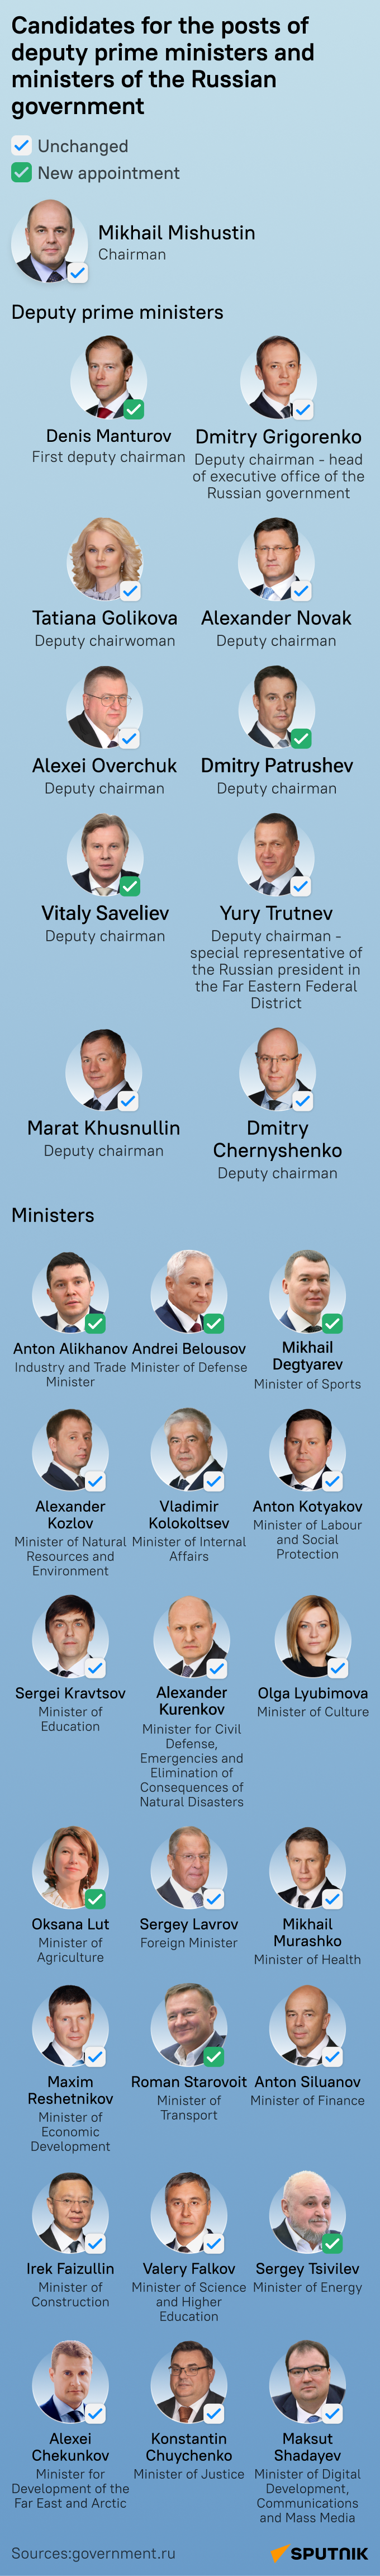 Who is Who in Moscow: Likely Makeup of New Russian Government MOB - Sputnik International